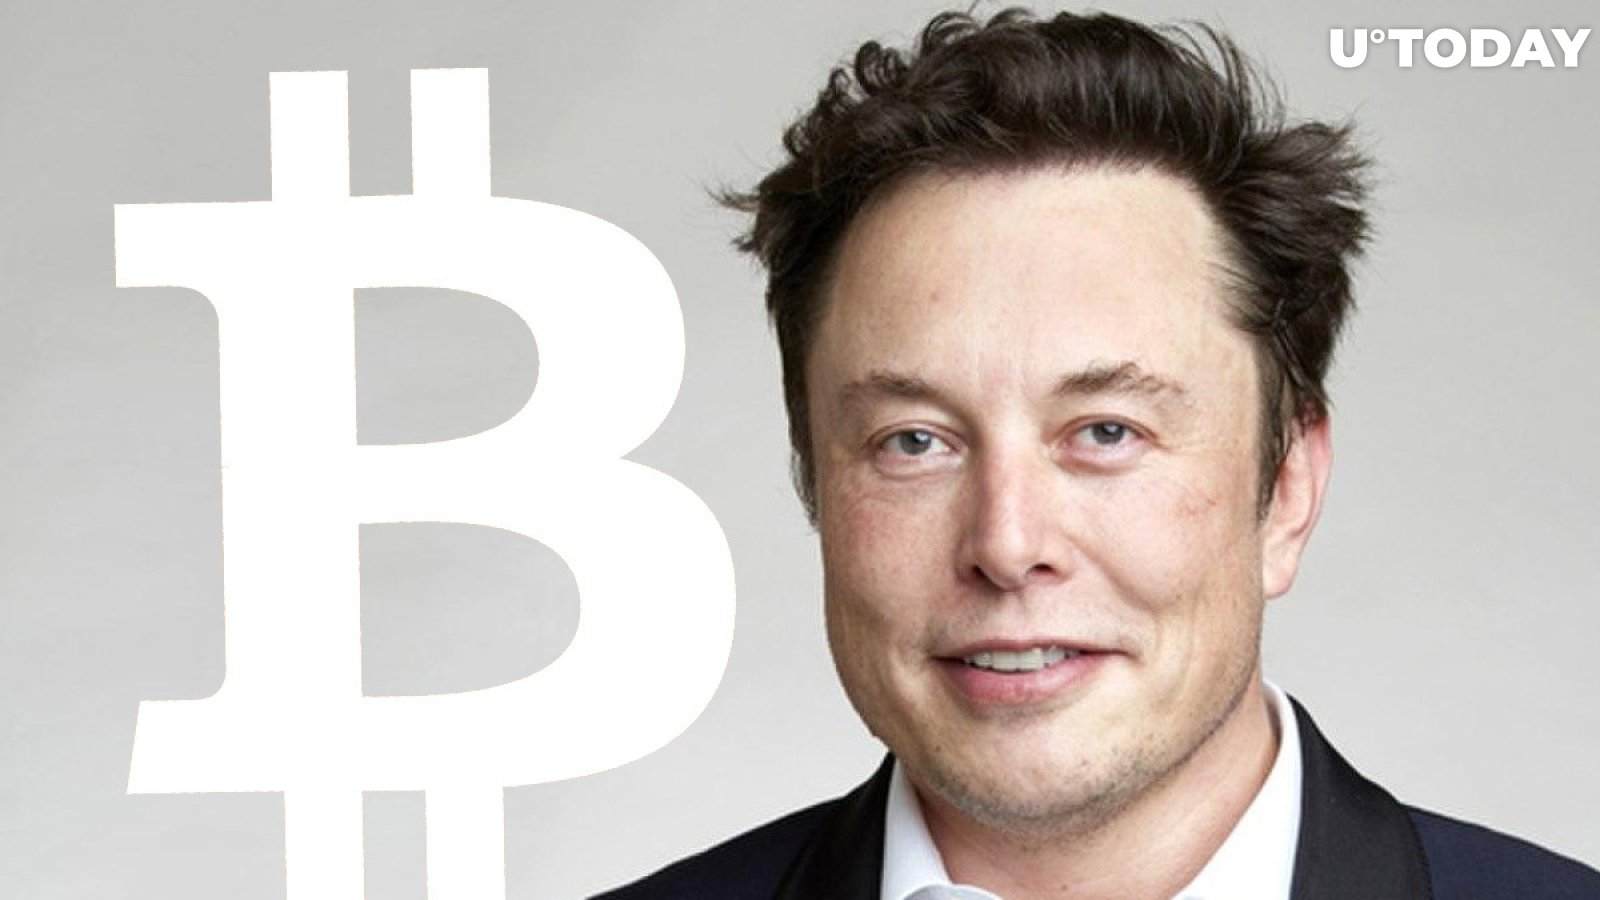 BTC Soars as Elon Musk Twitter Bio Section Now Shows One Word: Bitcoin